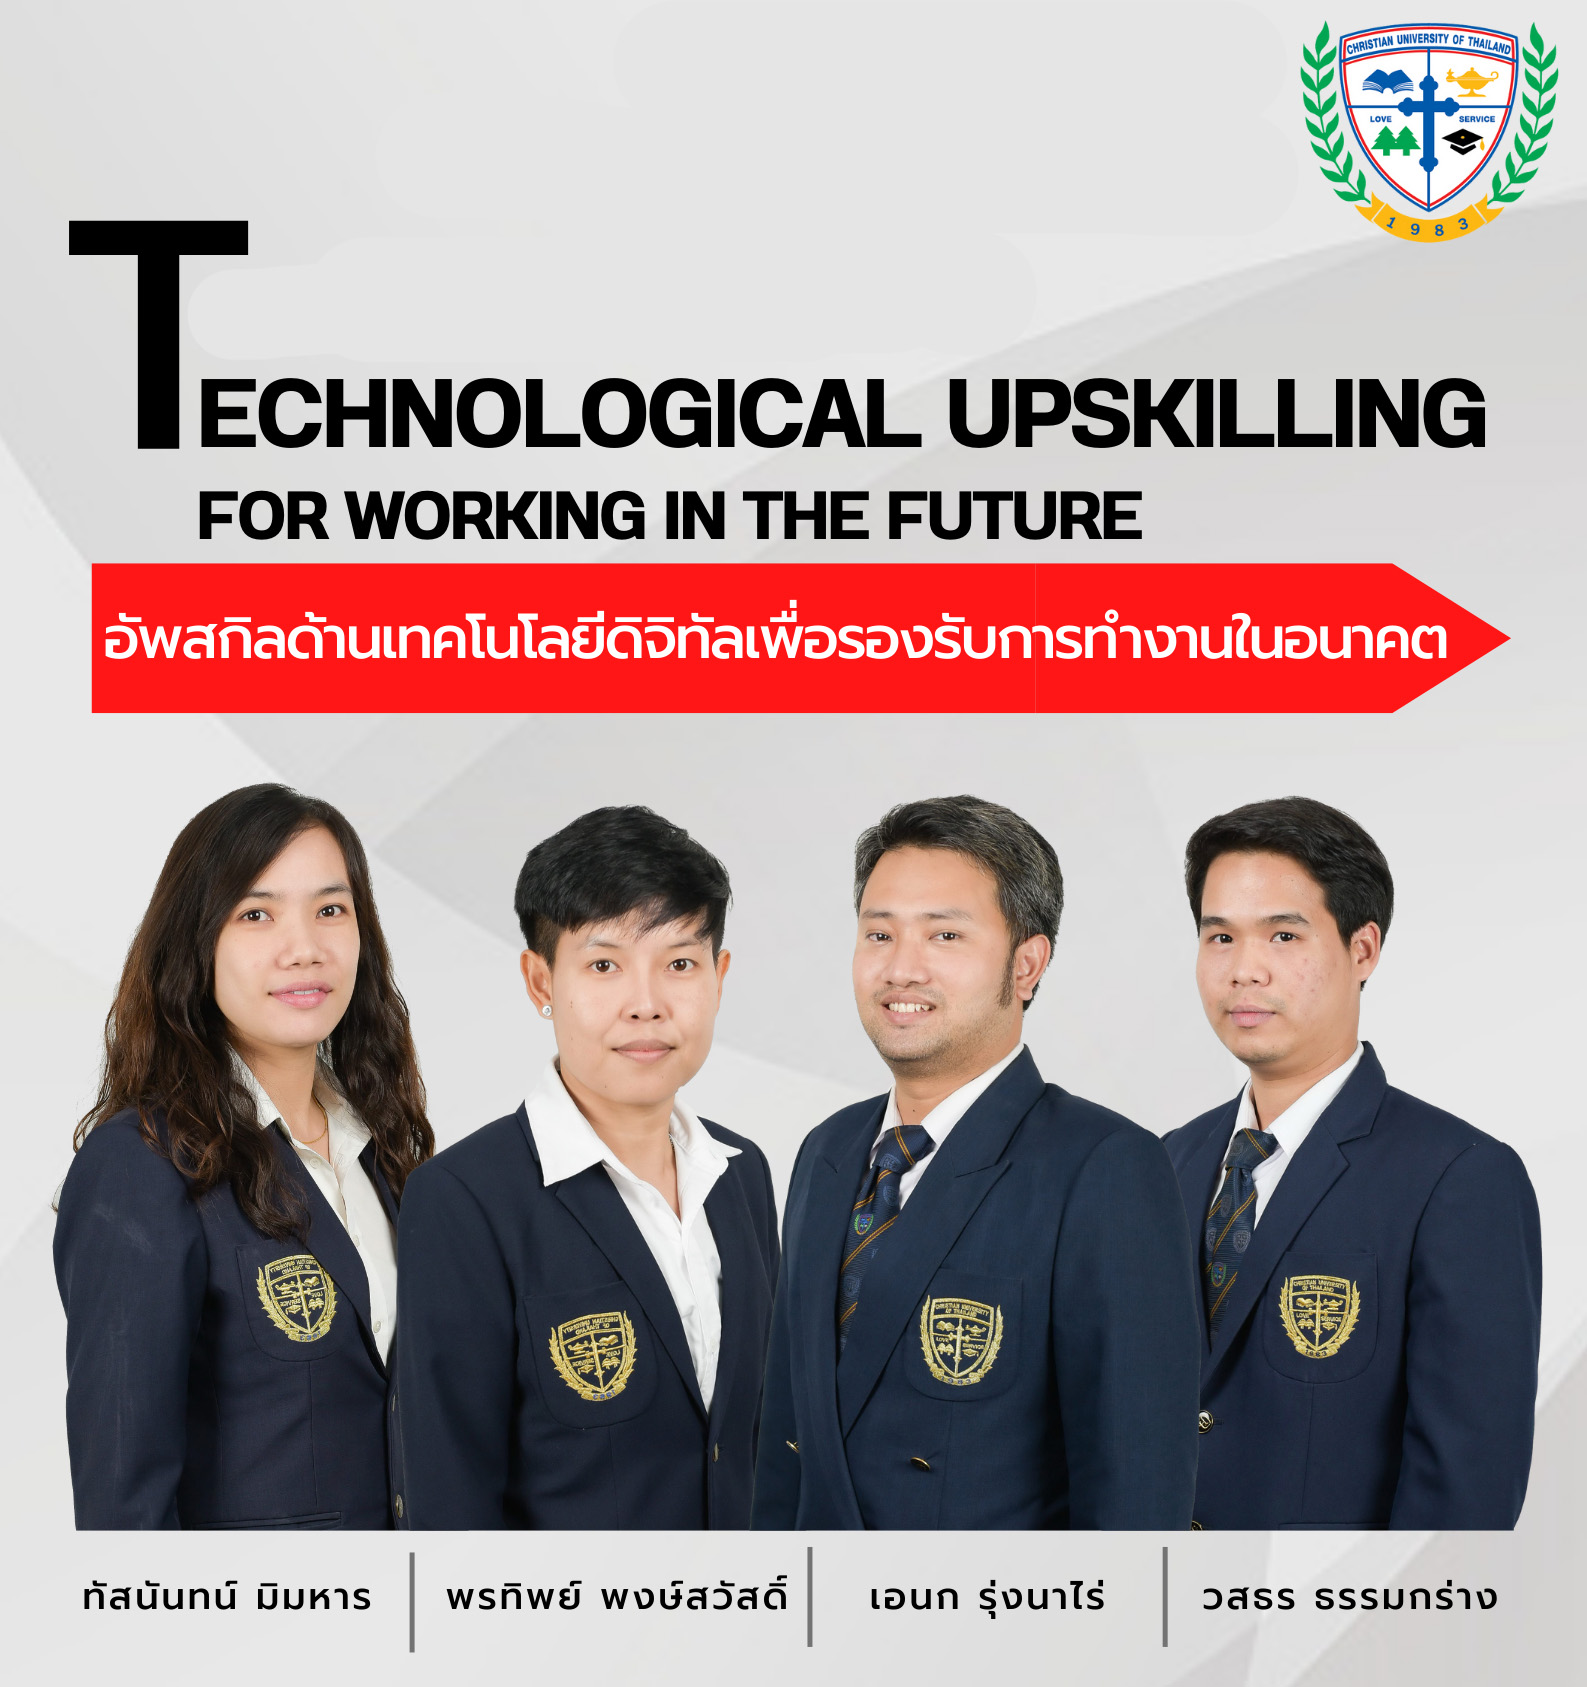 Technological Upskilling for Working in the Futurecrop